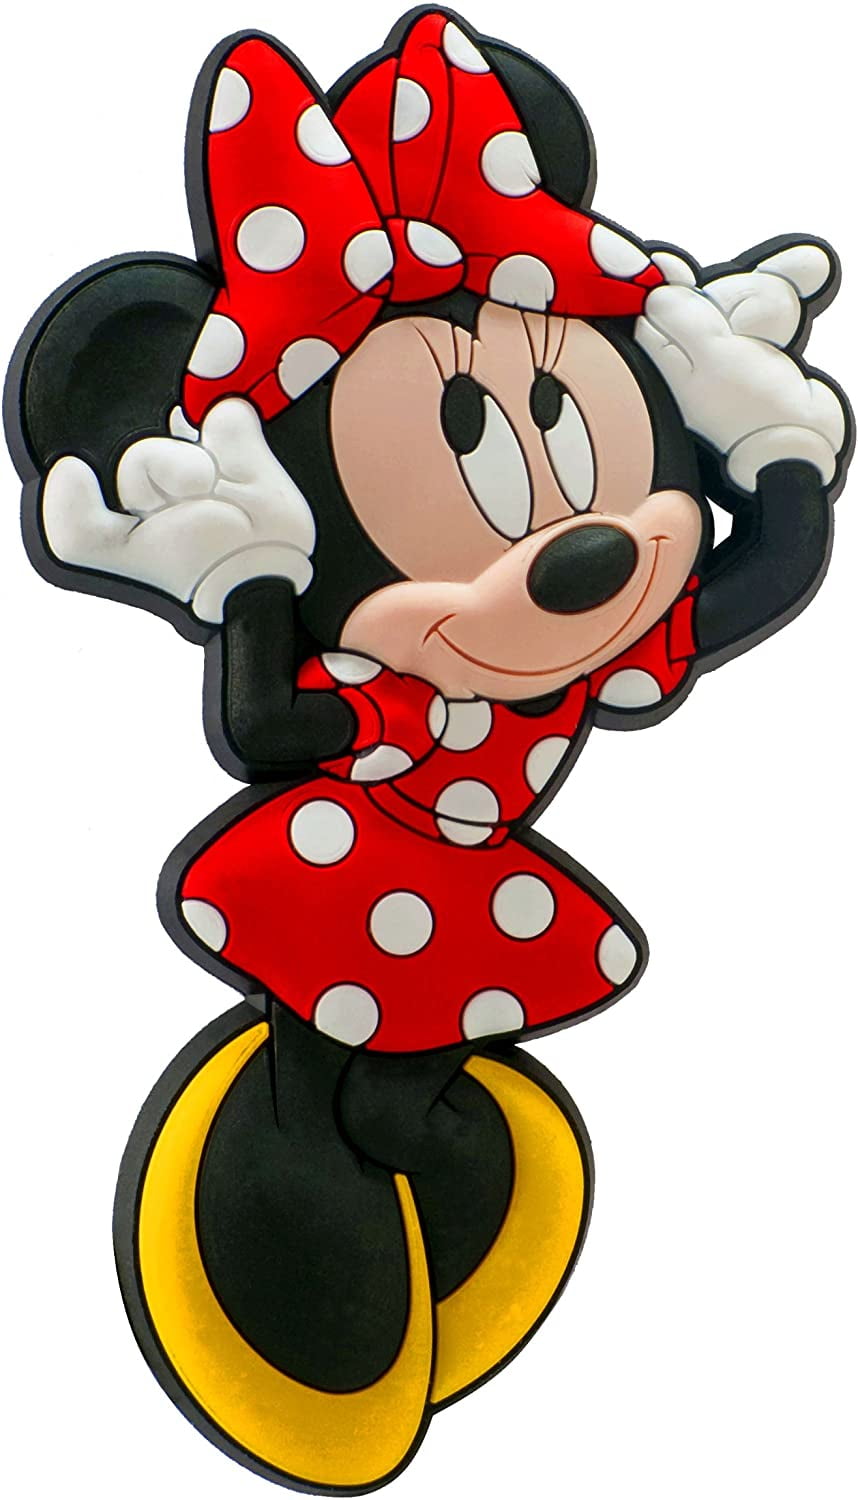 Disney's Mickey Mouse Soft Touch PVC Magnet: 